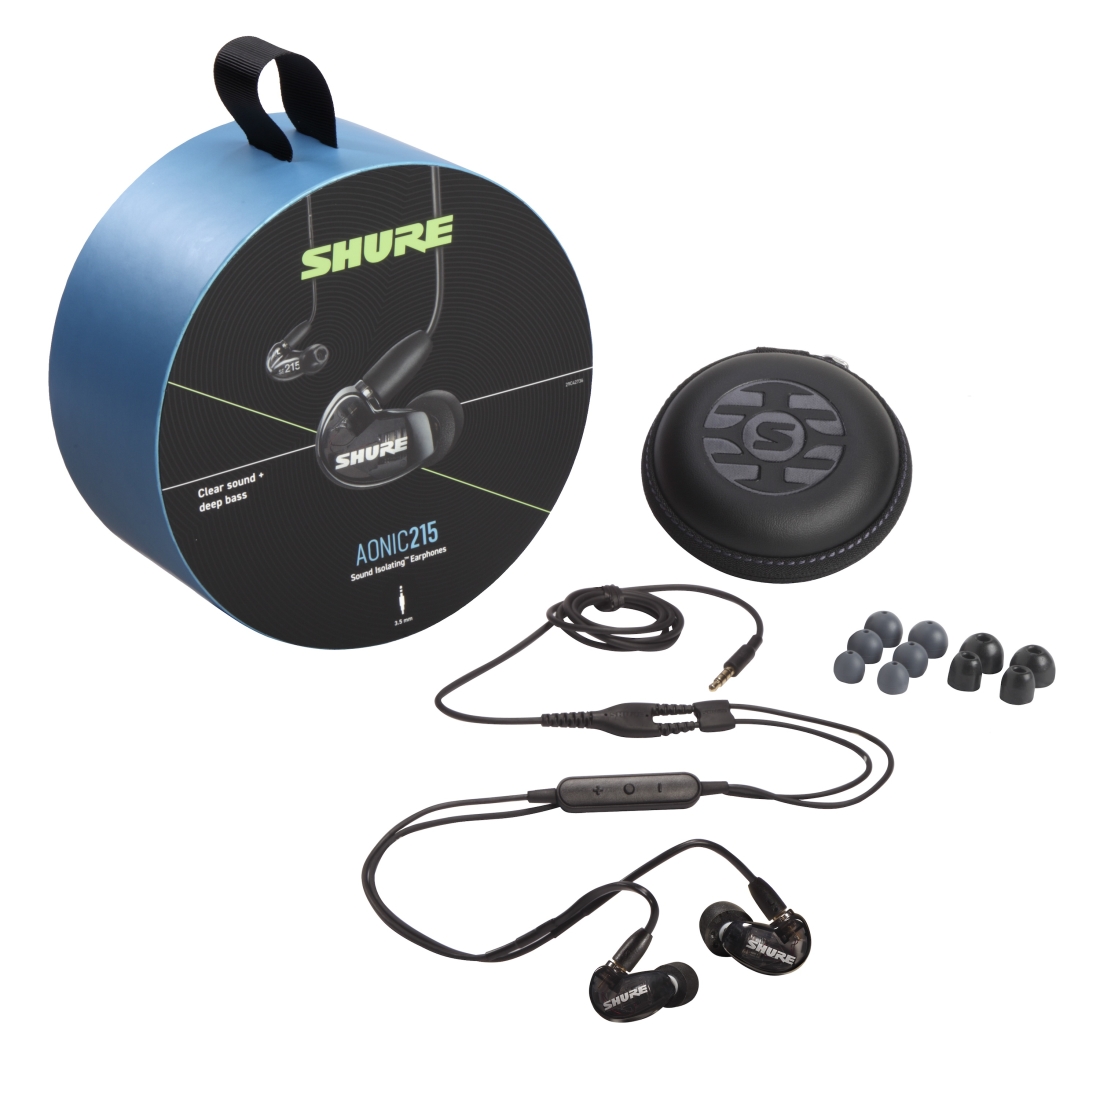 Aonic SE215 Sound Isolating Earphones with Communications Cable - Black